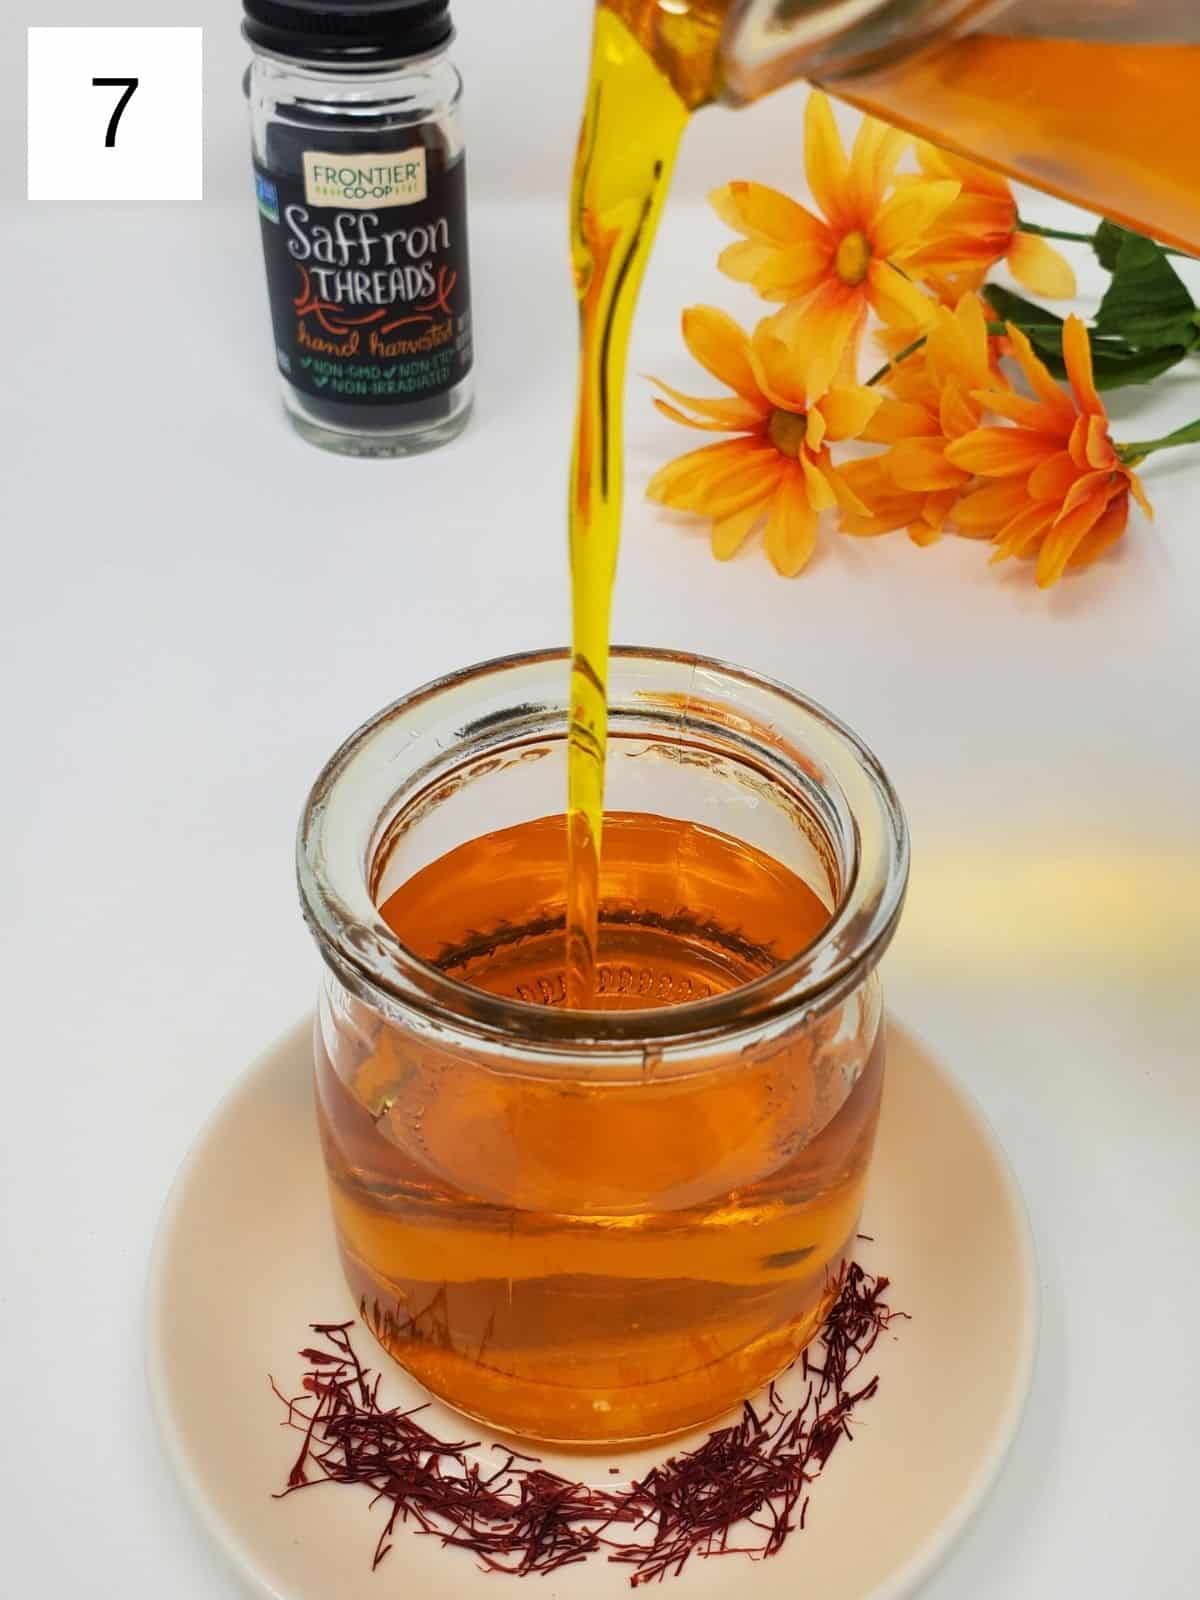 saffron syrup being poured into a glass container.